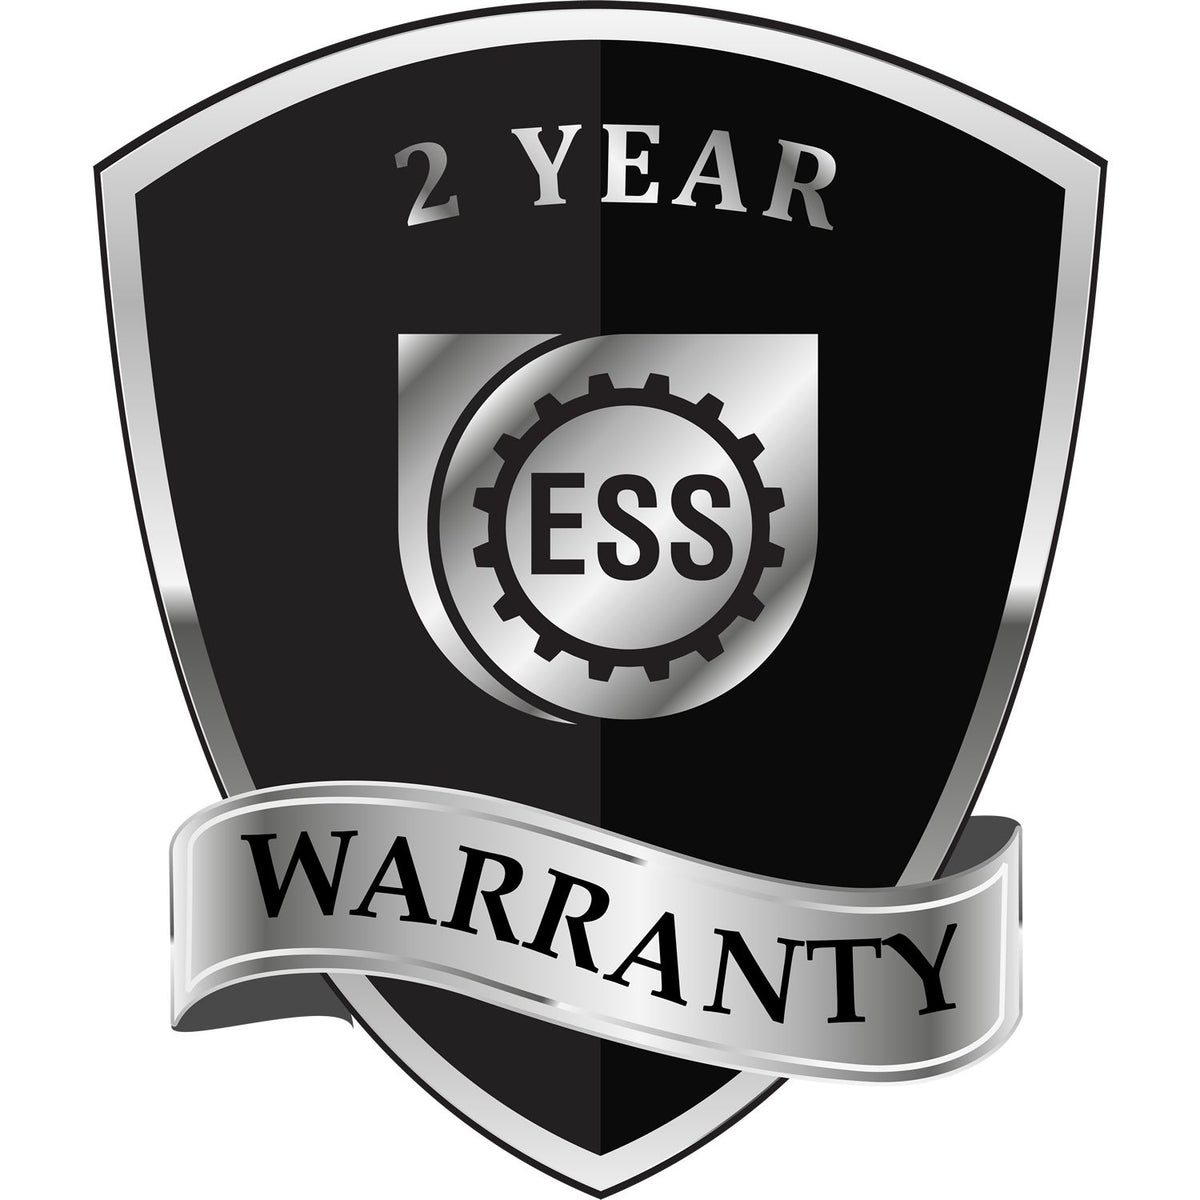 A black and silver badge or emblem showing warranty information for the Hybrid South Dakota Architect Seal